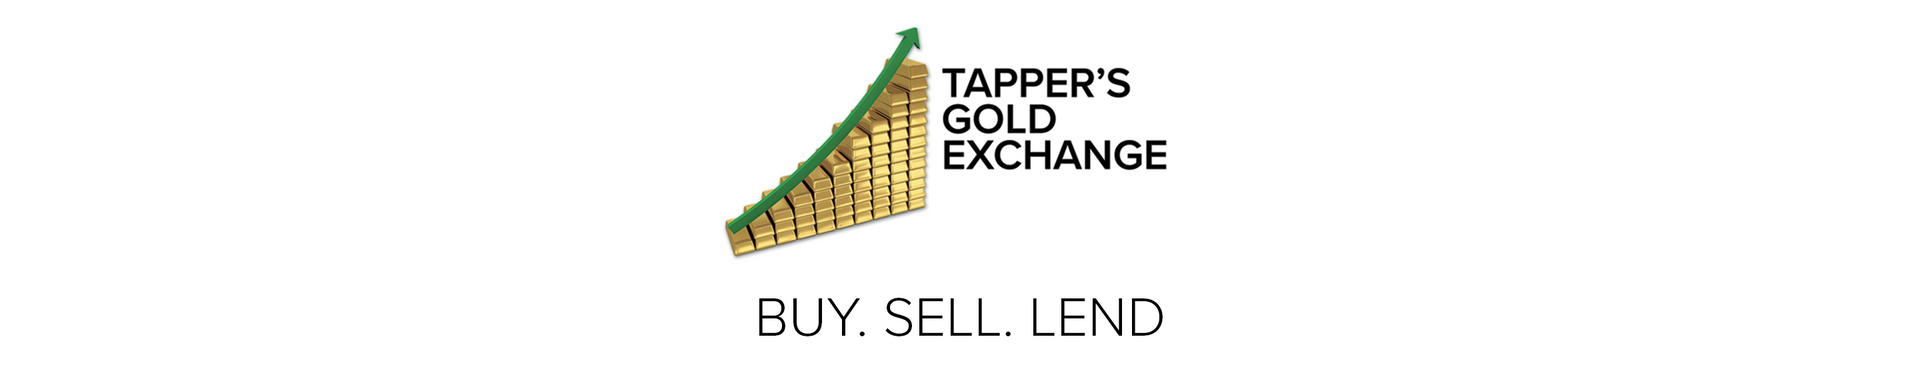 Tapper's Gold Exchange - Buy, Sell, Lend